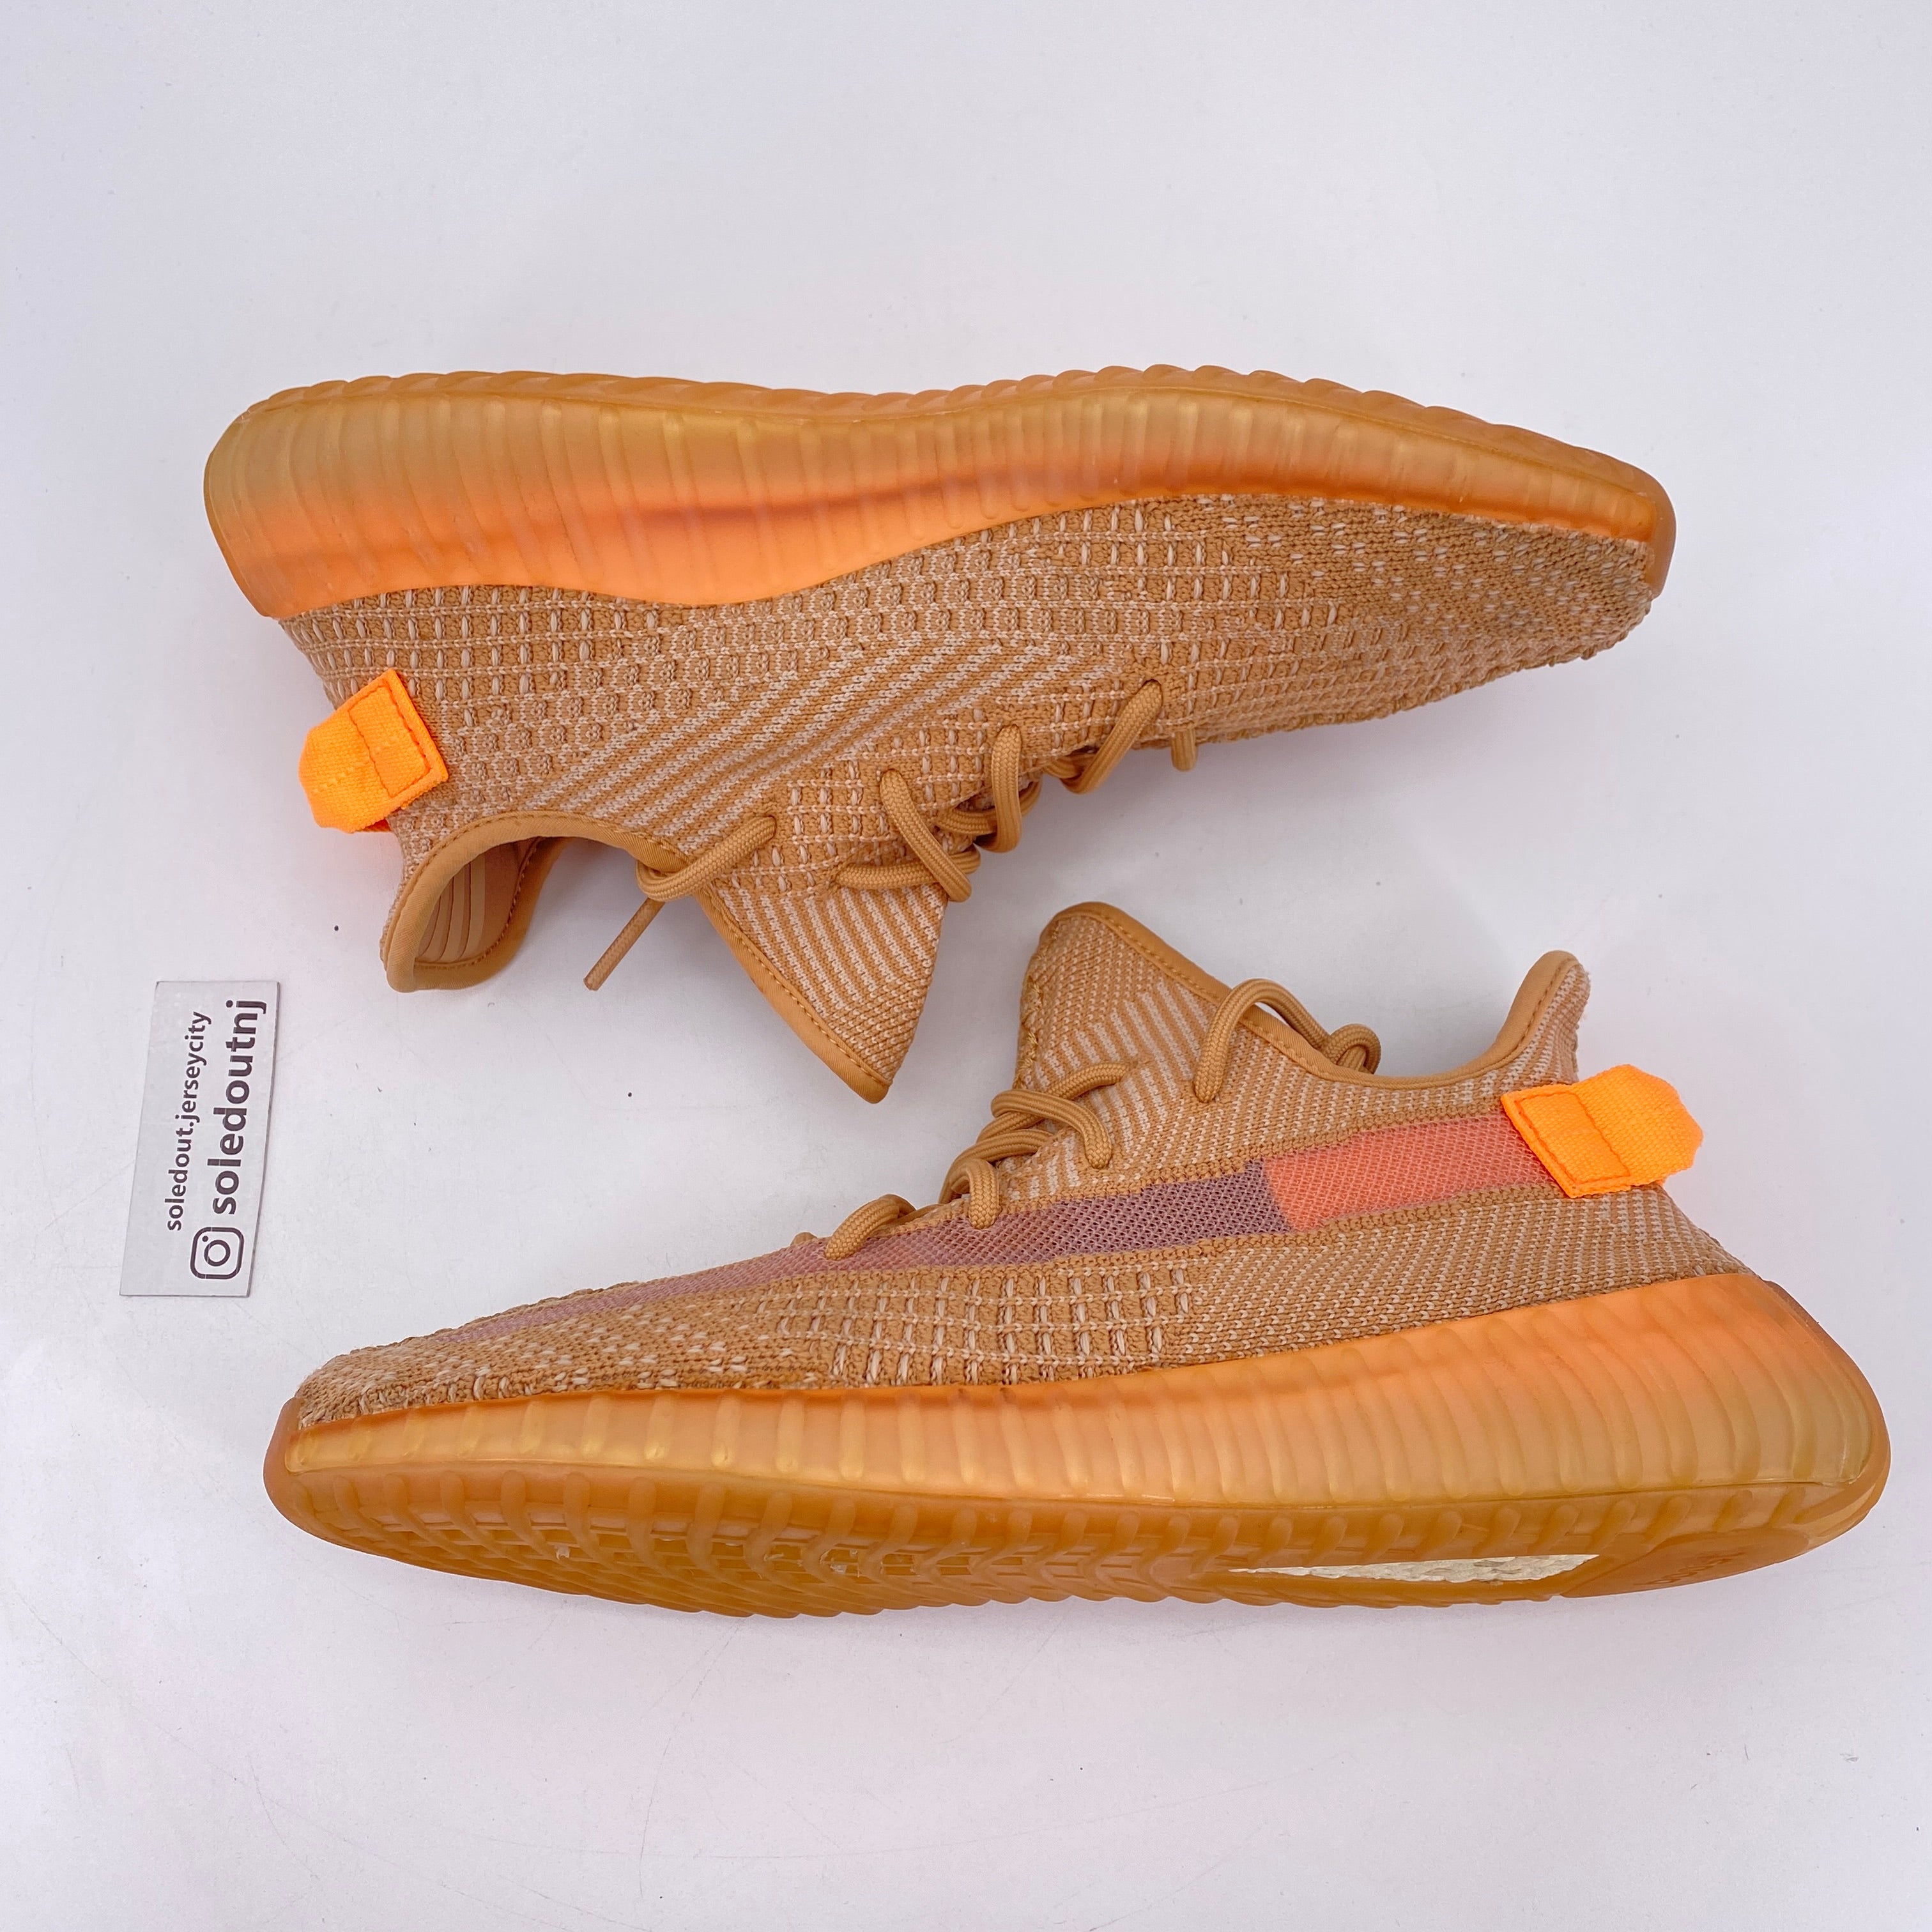 Yeezy 350 v2 &quot;Clay&quot; 2019 Used Size 9